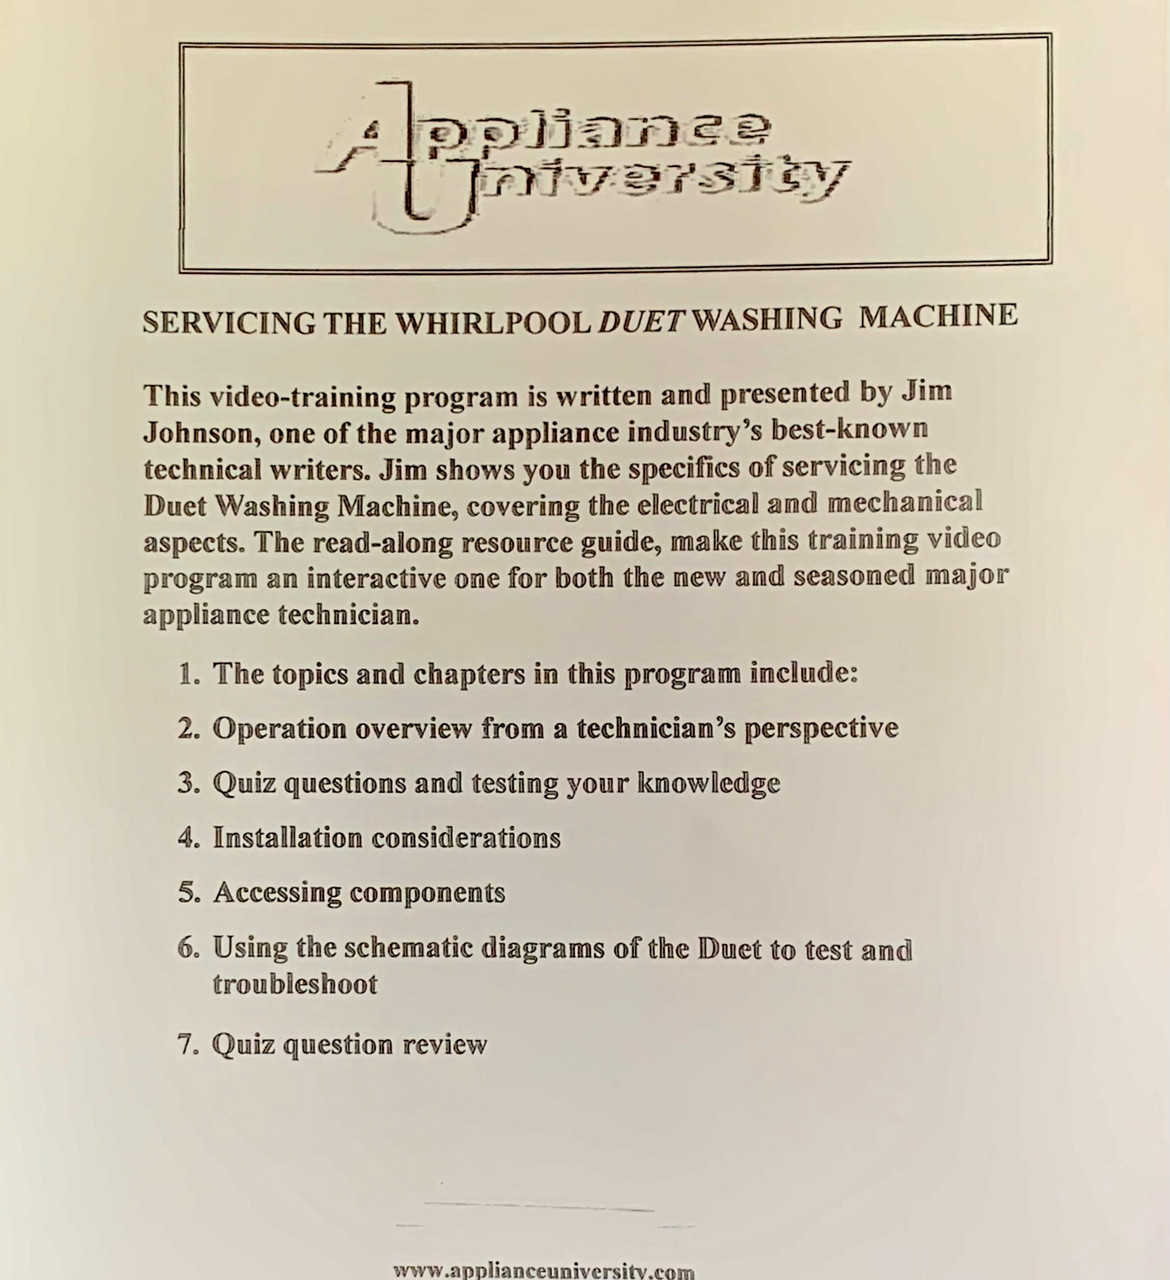 Resource Guide for the Whirlpool Duet Clothes Washer 